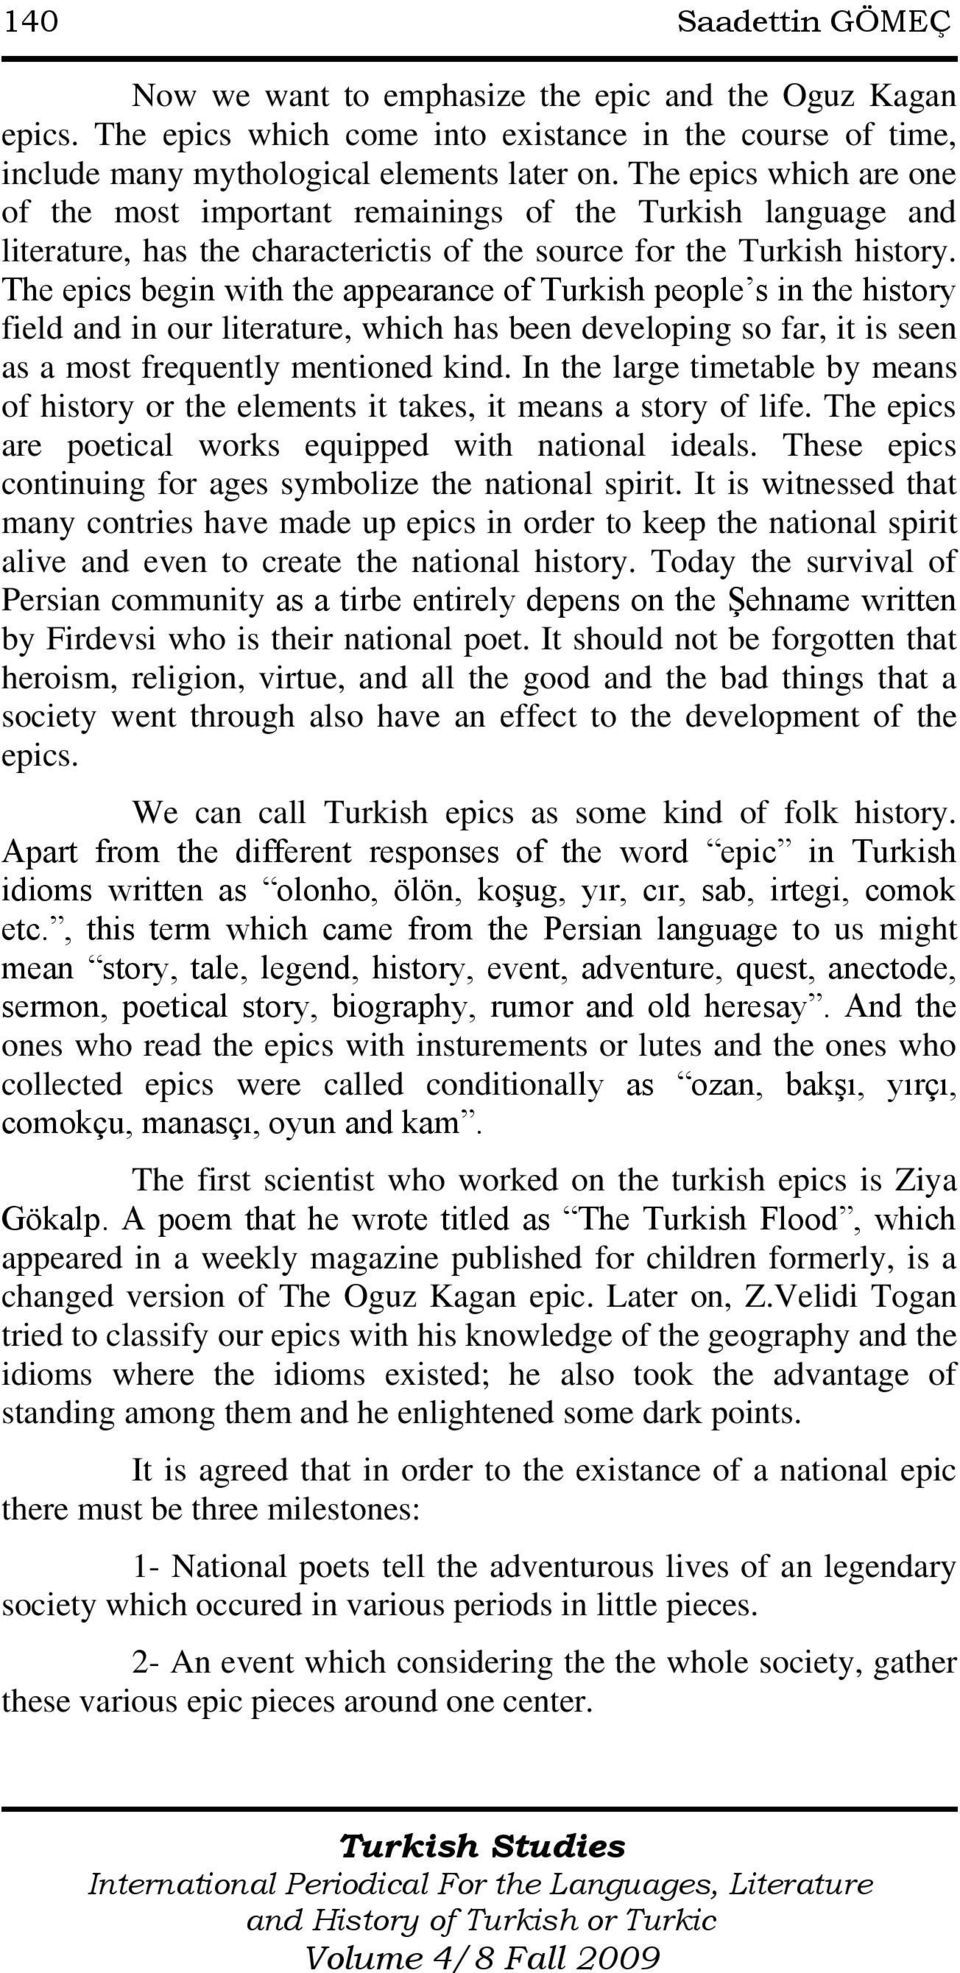 The epics begin with the appearance of Turkish people s in the history field and in our literature, which has been developing so far, it is seen as a most frequently mentioned kind.